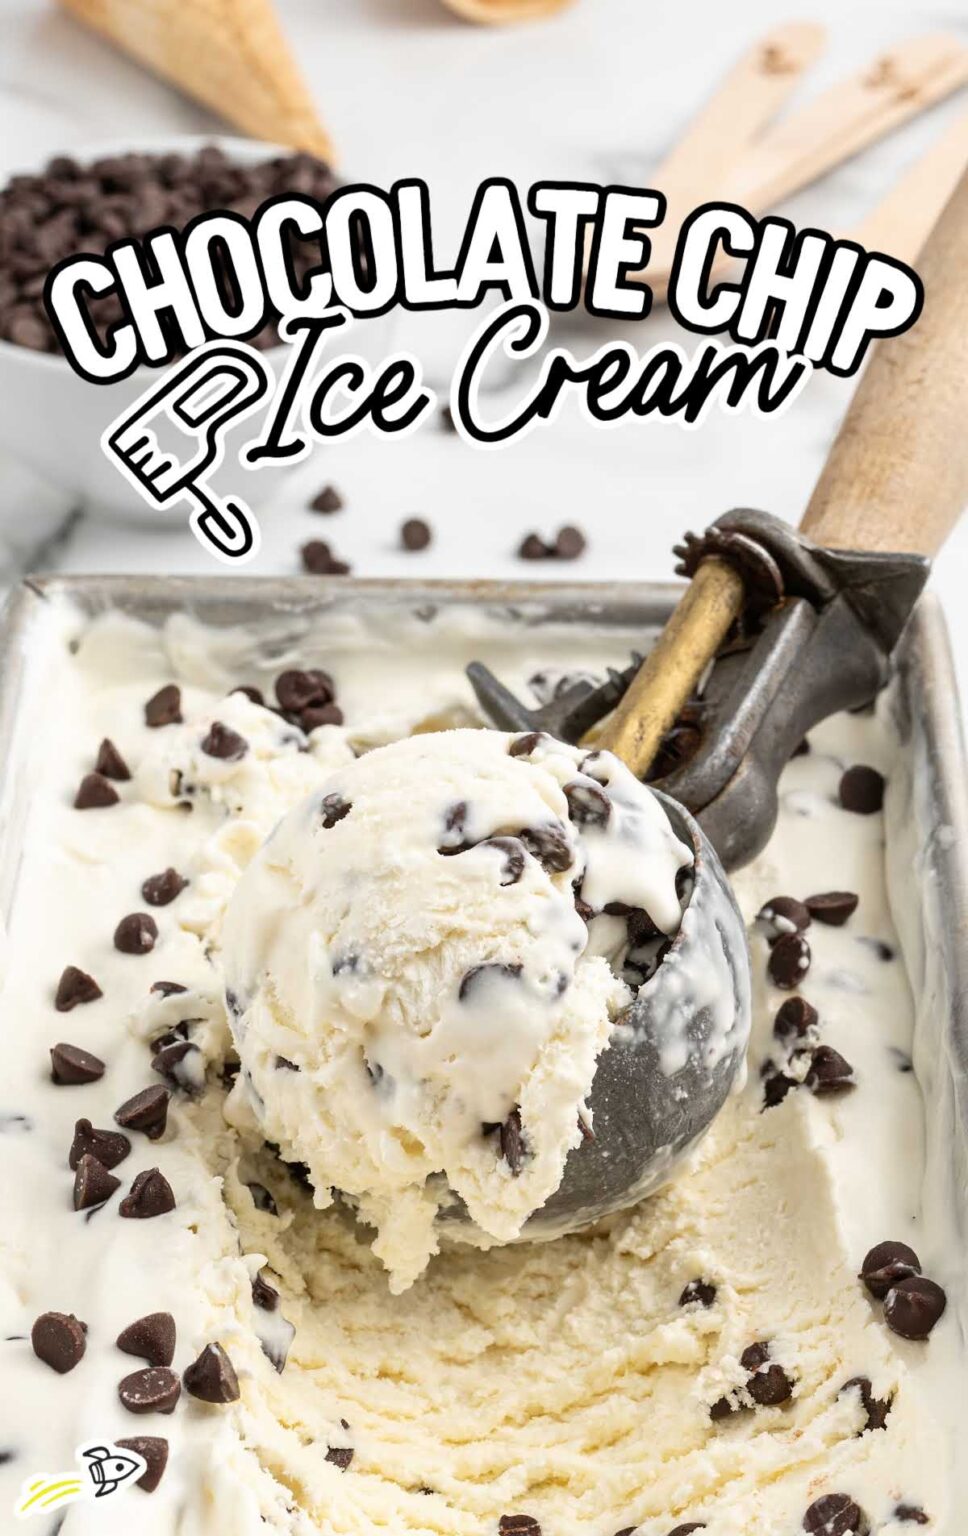 Chocolate Chip Ice Cream - Spaceships and Laser Beams